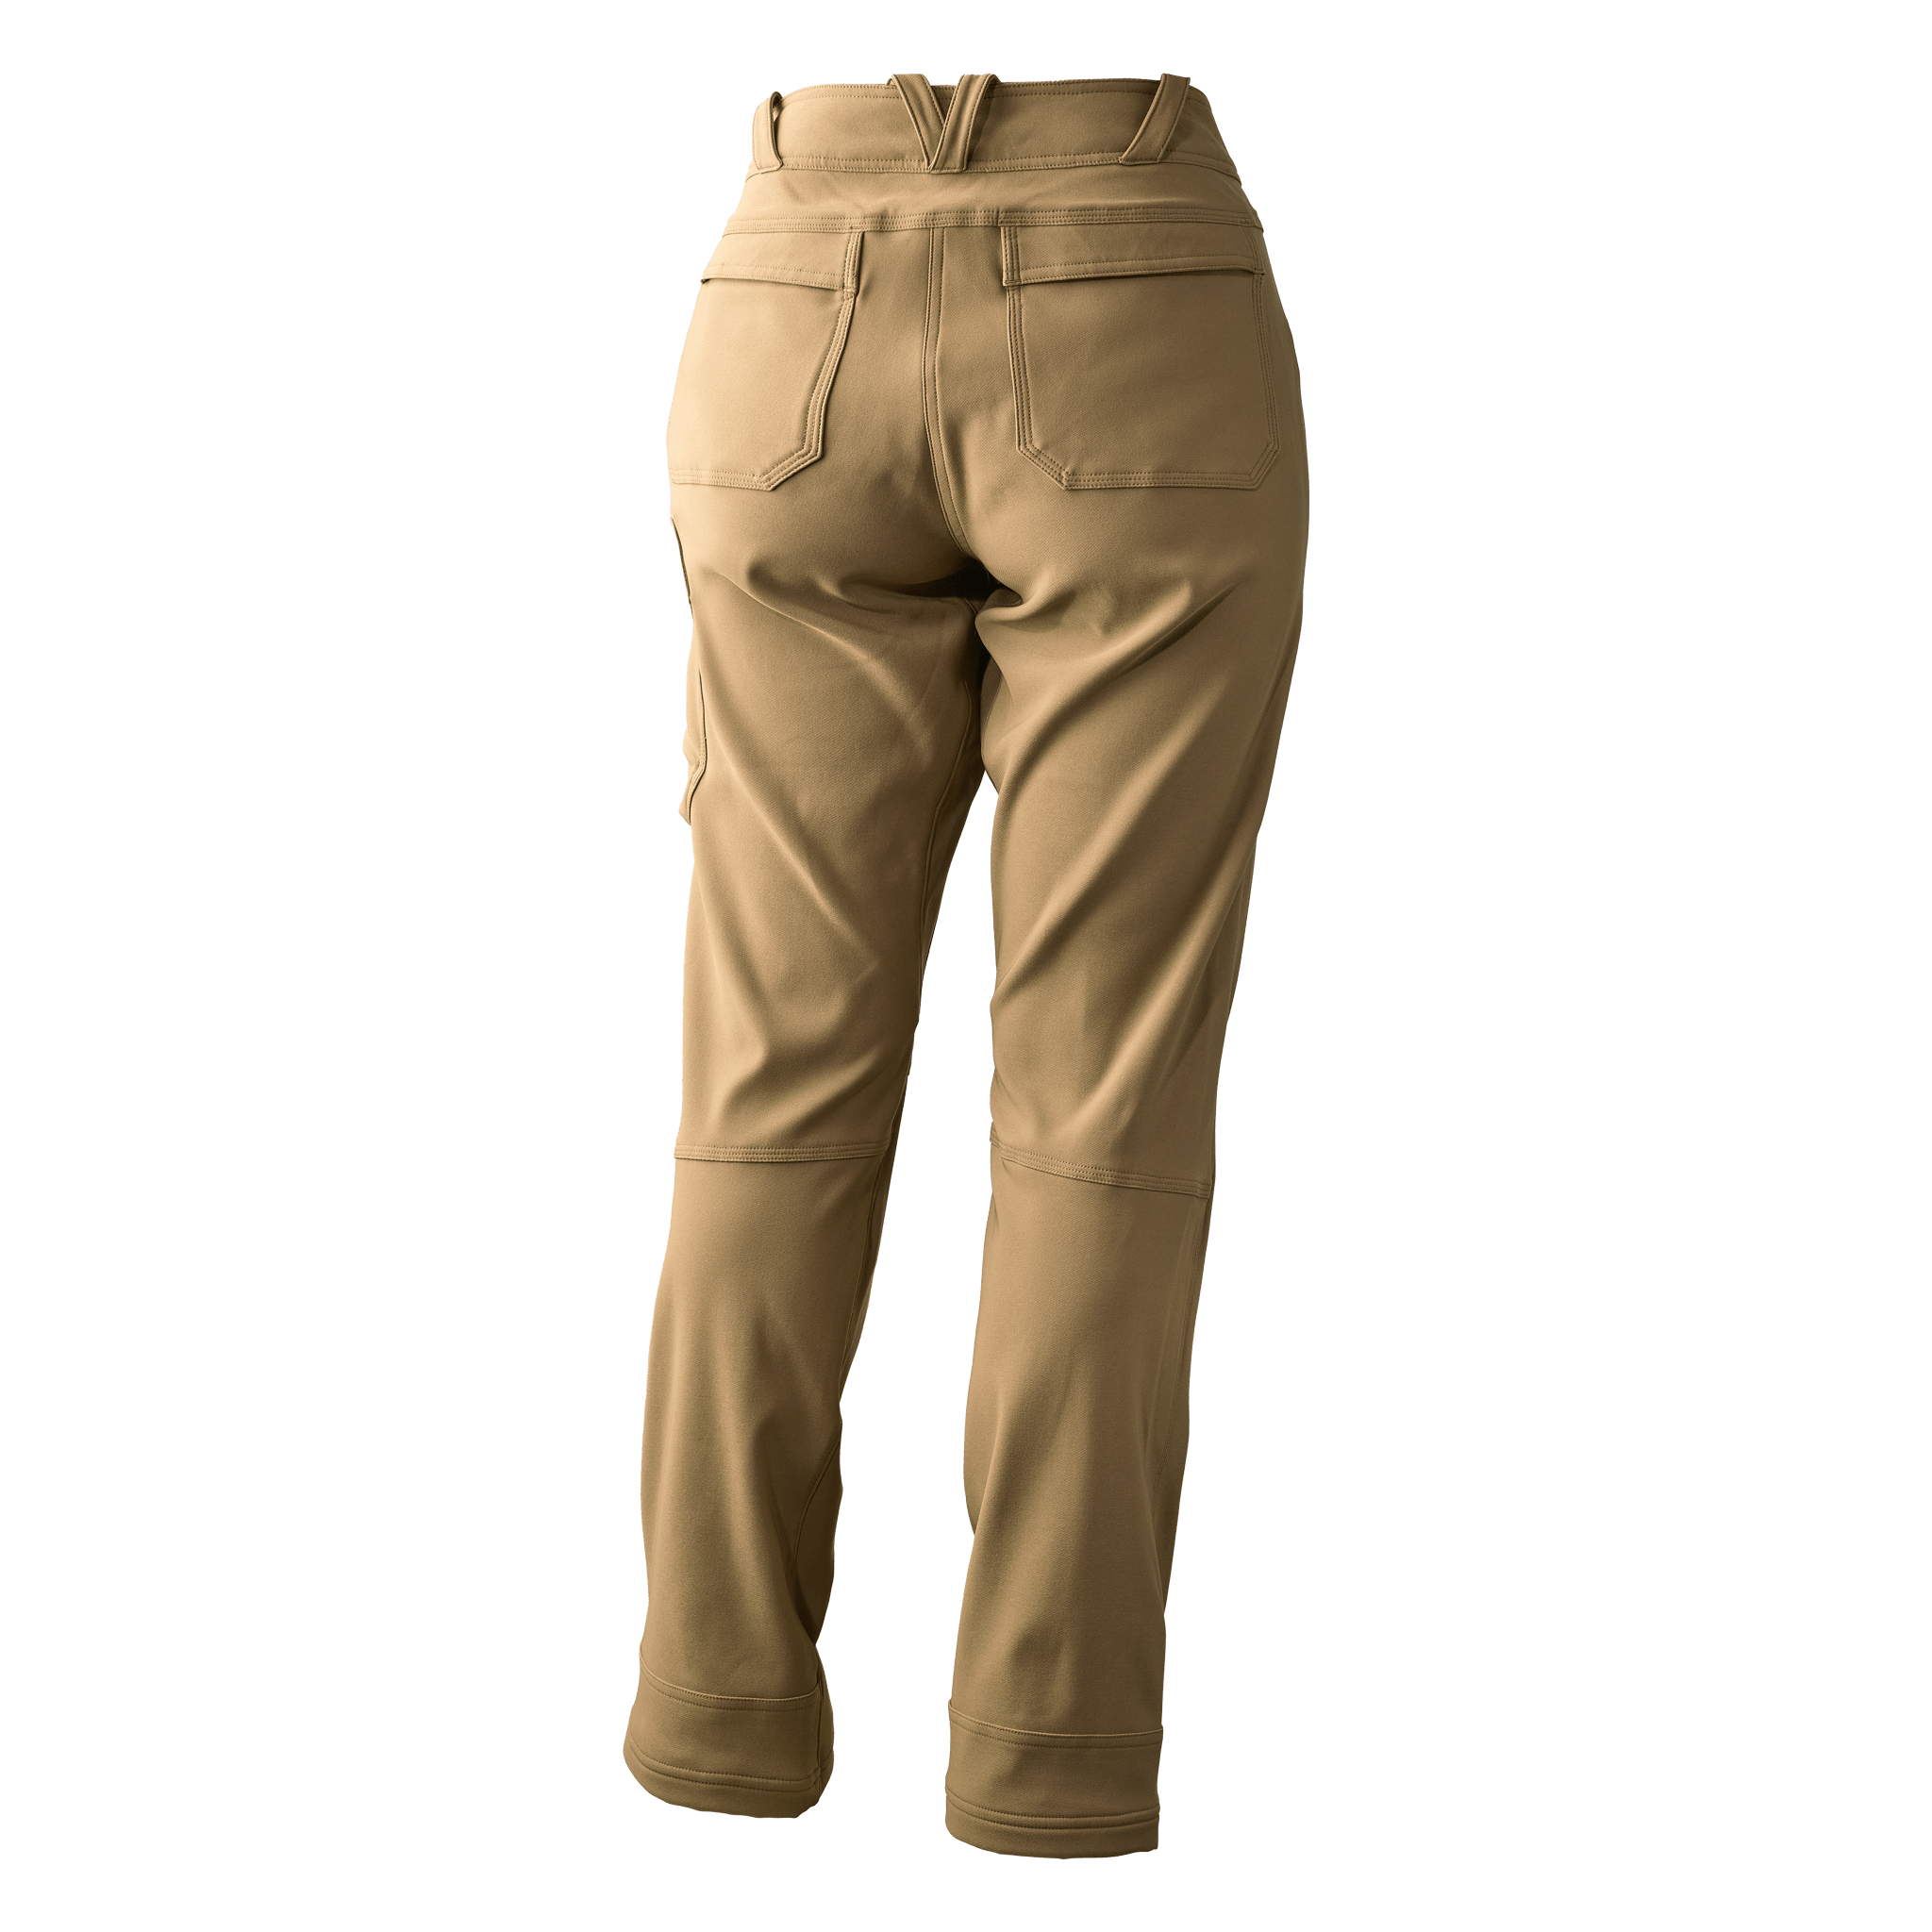 Womens Work Trousers Combat Cargo Trousers Women with Pocket Workwear Pants  at Amazon Women's Clothing store